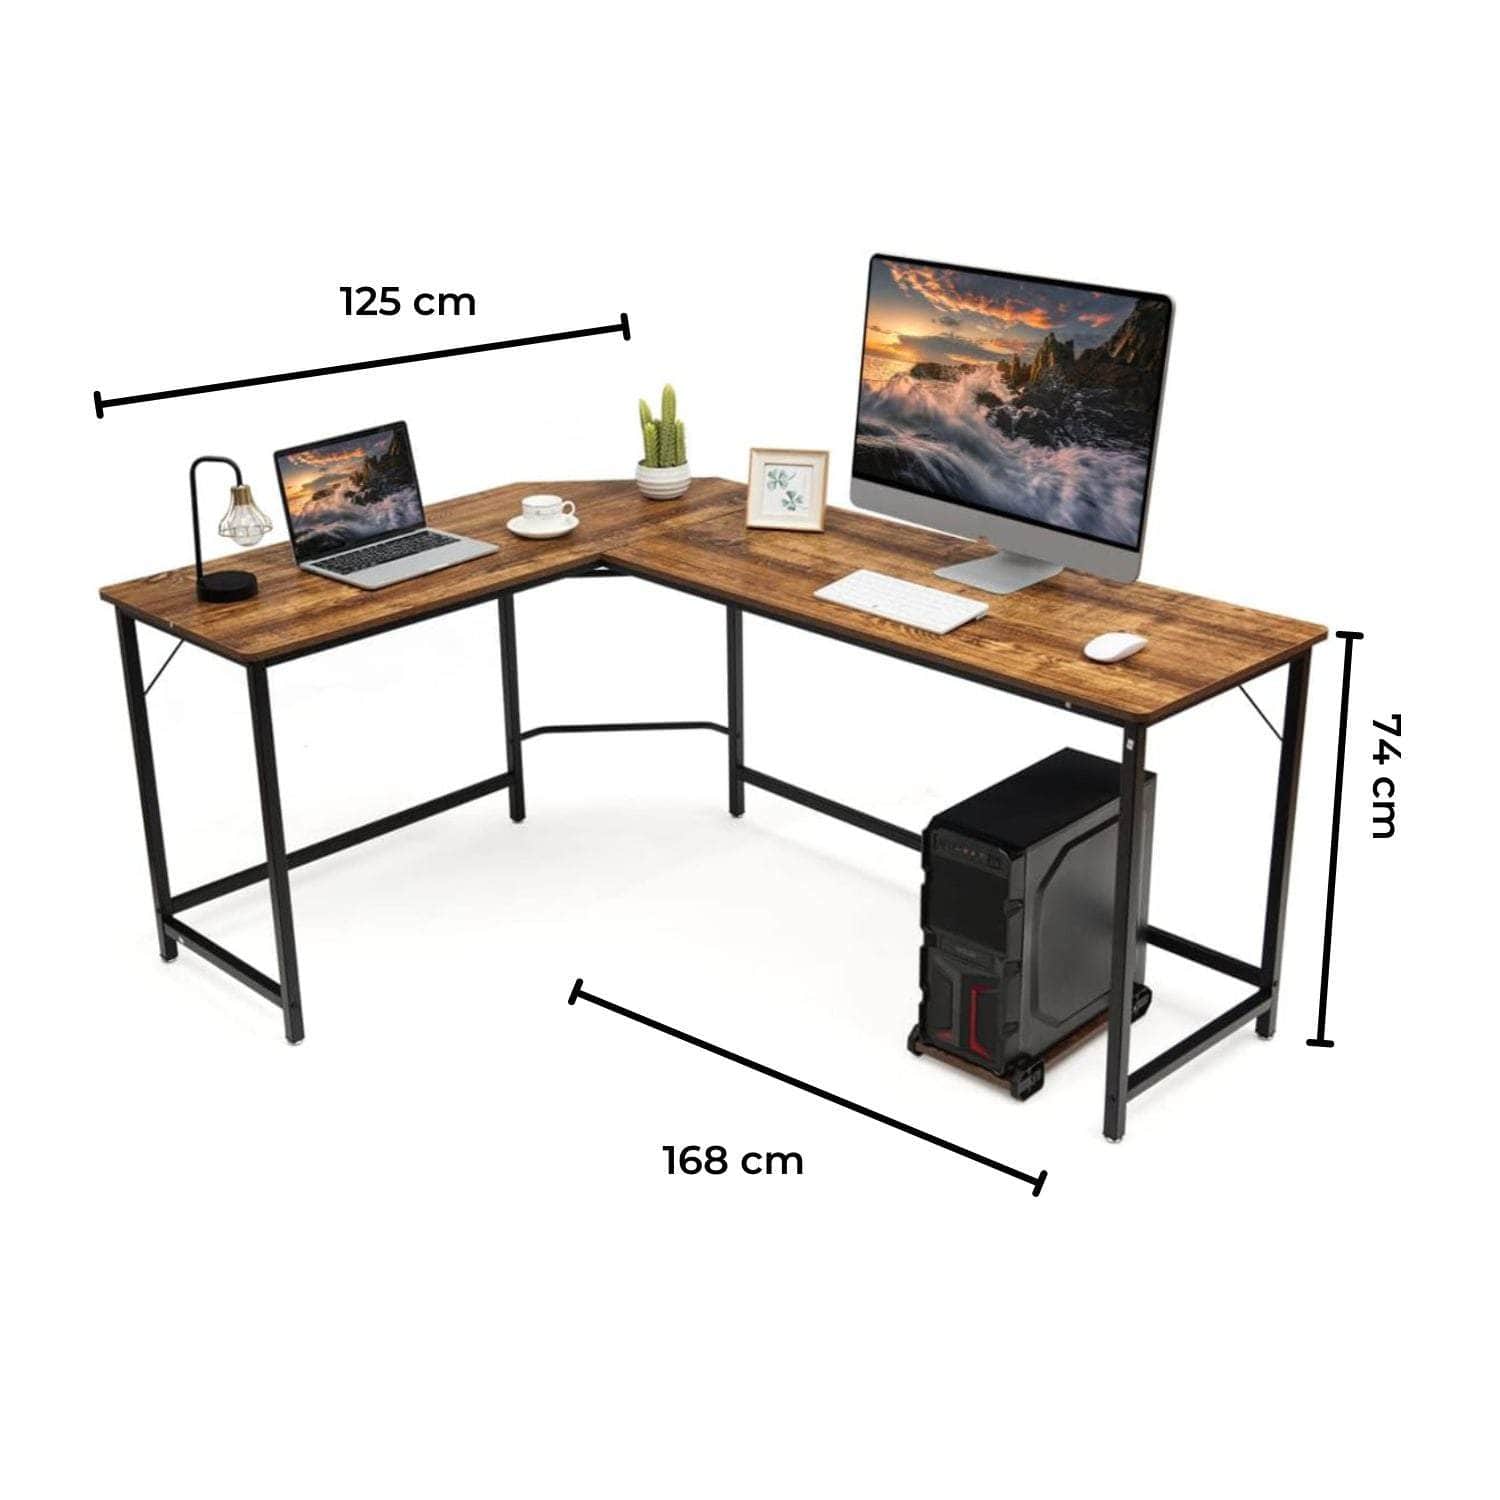 L-Shaped Corner Computer Desk With Cpu Stand Brown/Black